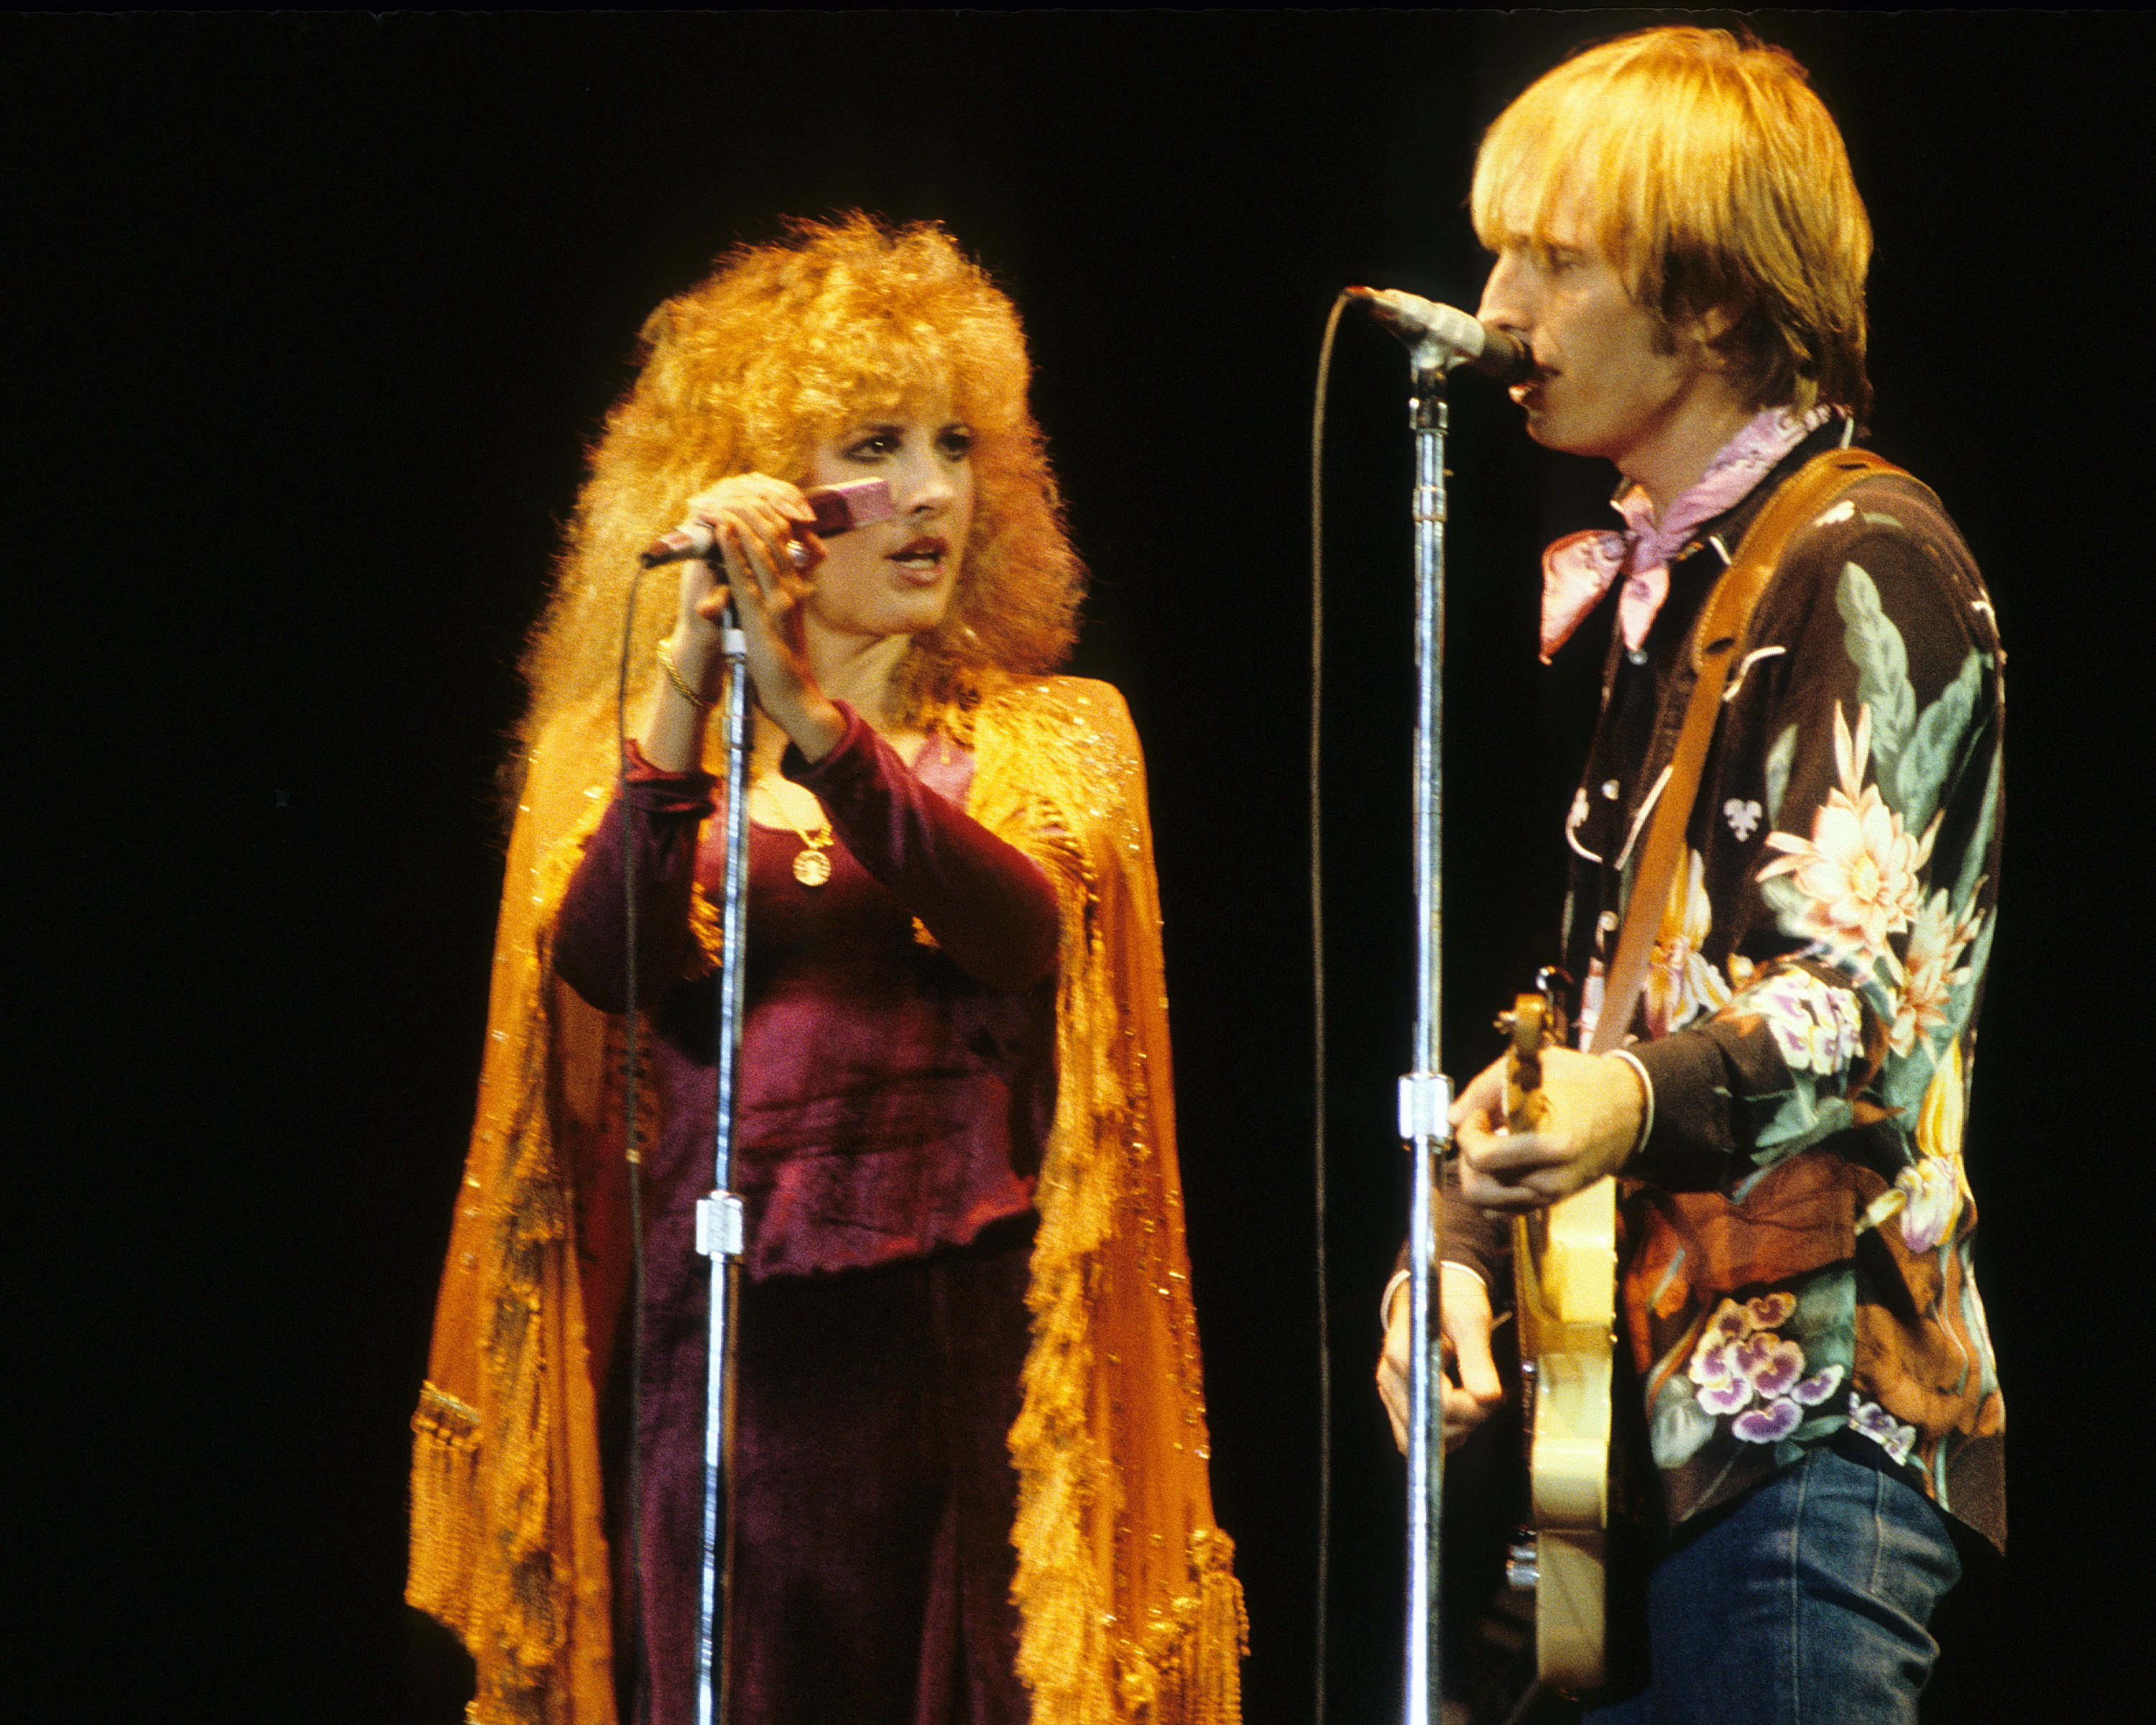 Stevie Nicks and Tom Petty stand in front of microphones. Petty holds a guitar.